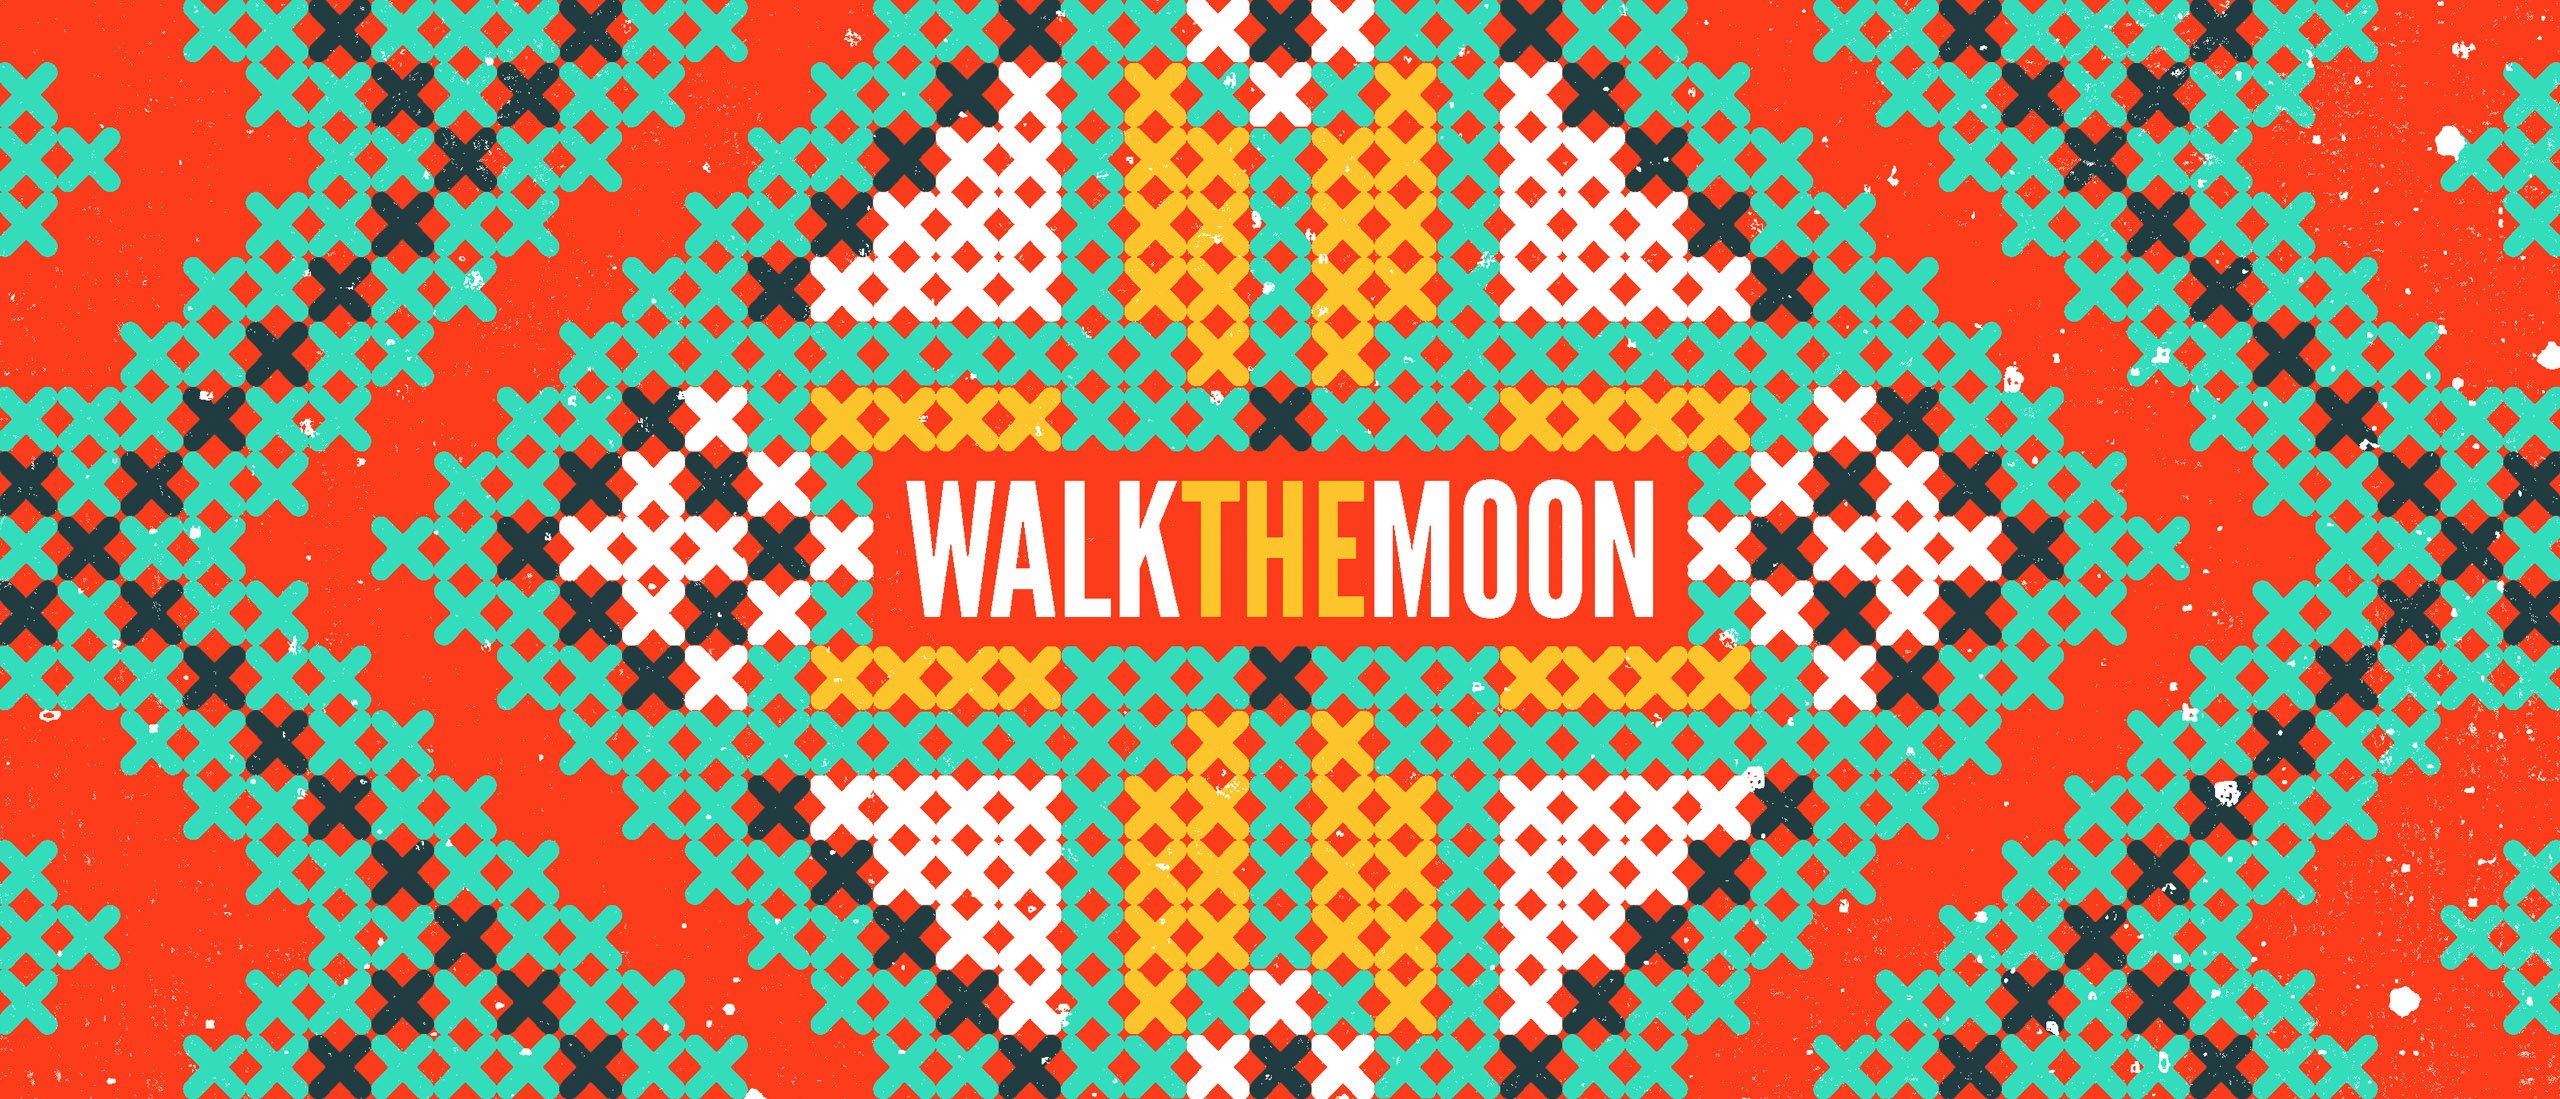 walk, The, Moon, Indie, Rock, Roll, Pop, New, Wave, Dance, Indietronica, 1wmoon, Poster Wallpaper